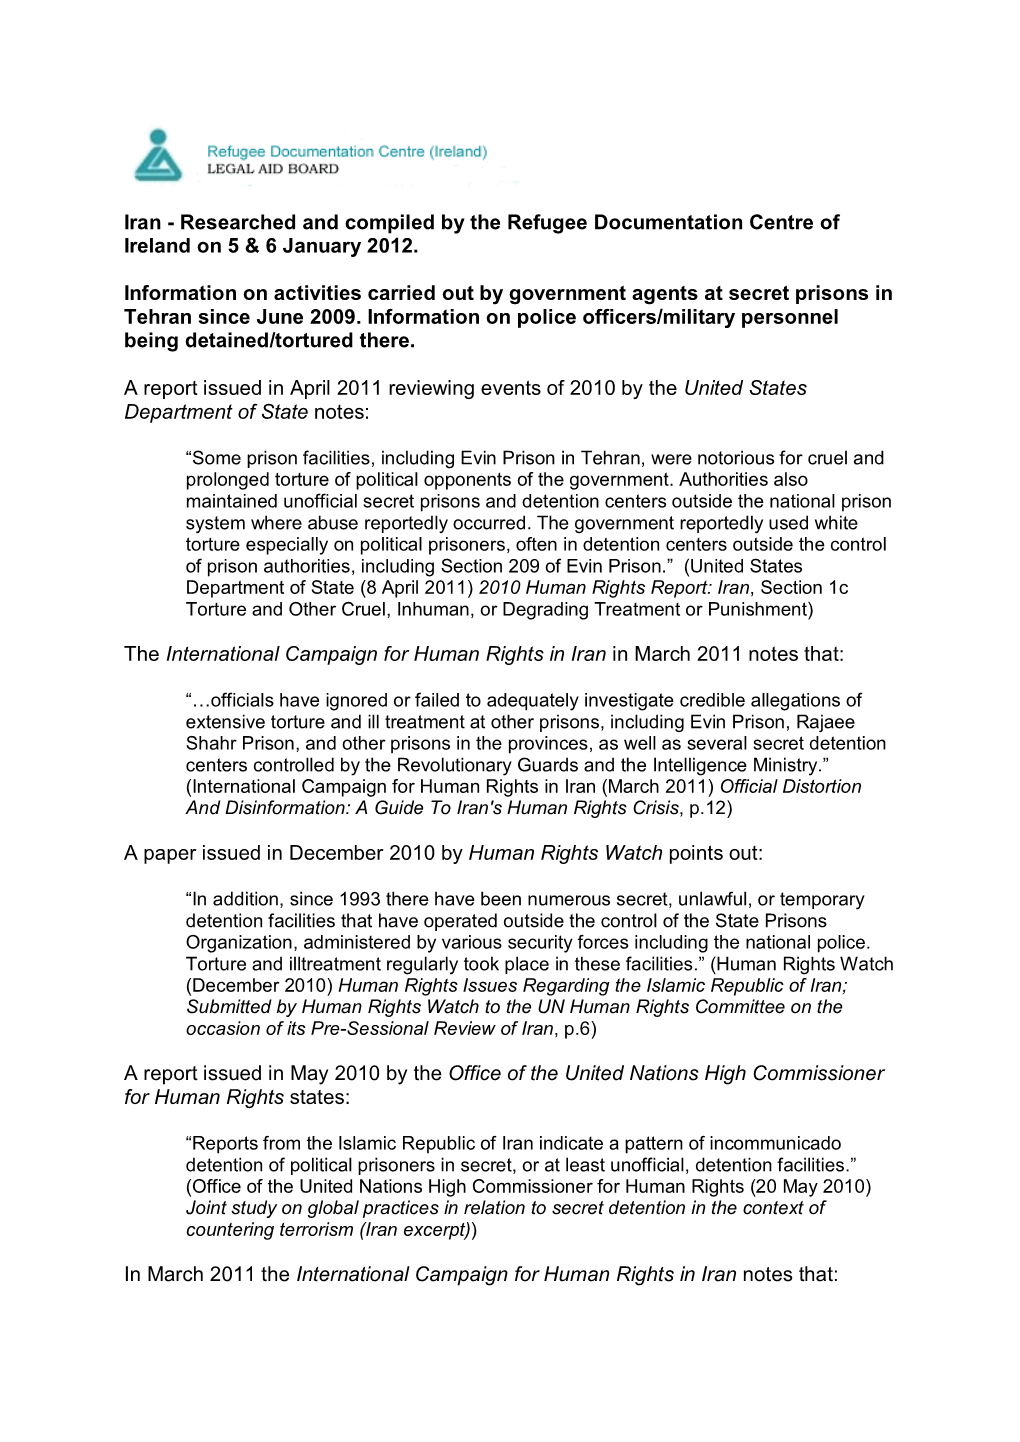 Iran - Researched and Compiled by the Refugee Documentation Centre of Ireland on 5 & 6 January 2012